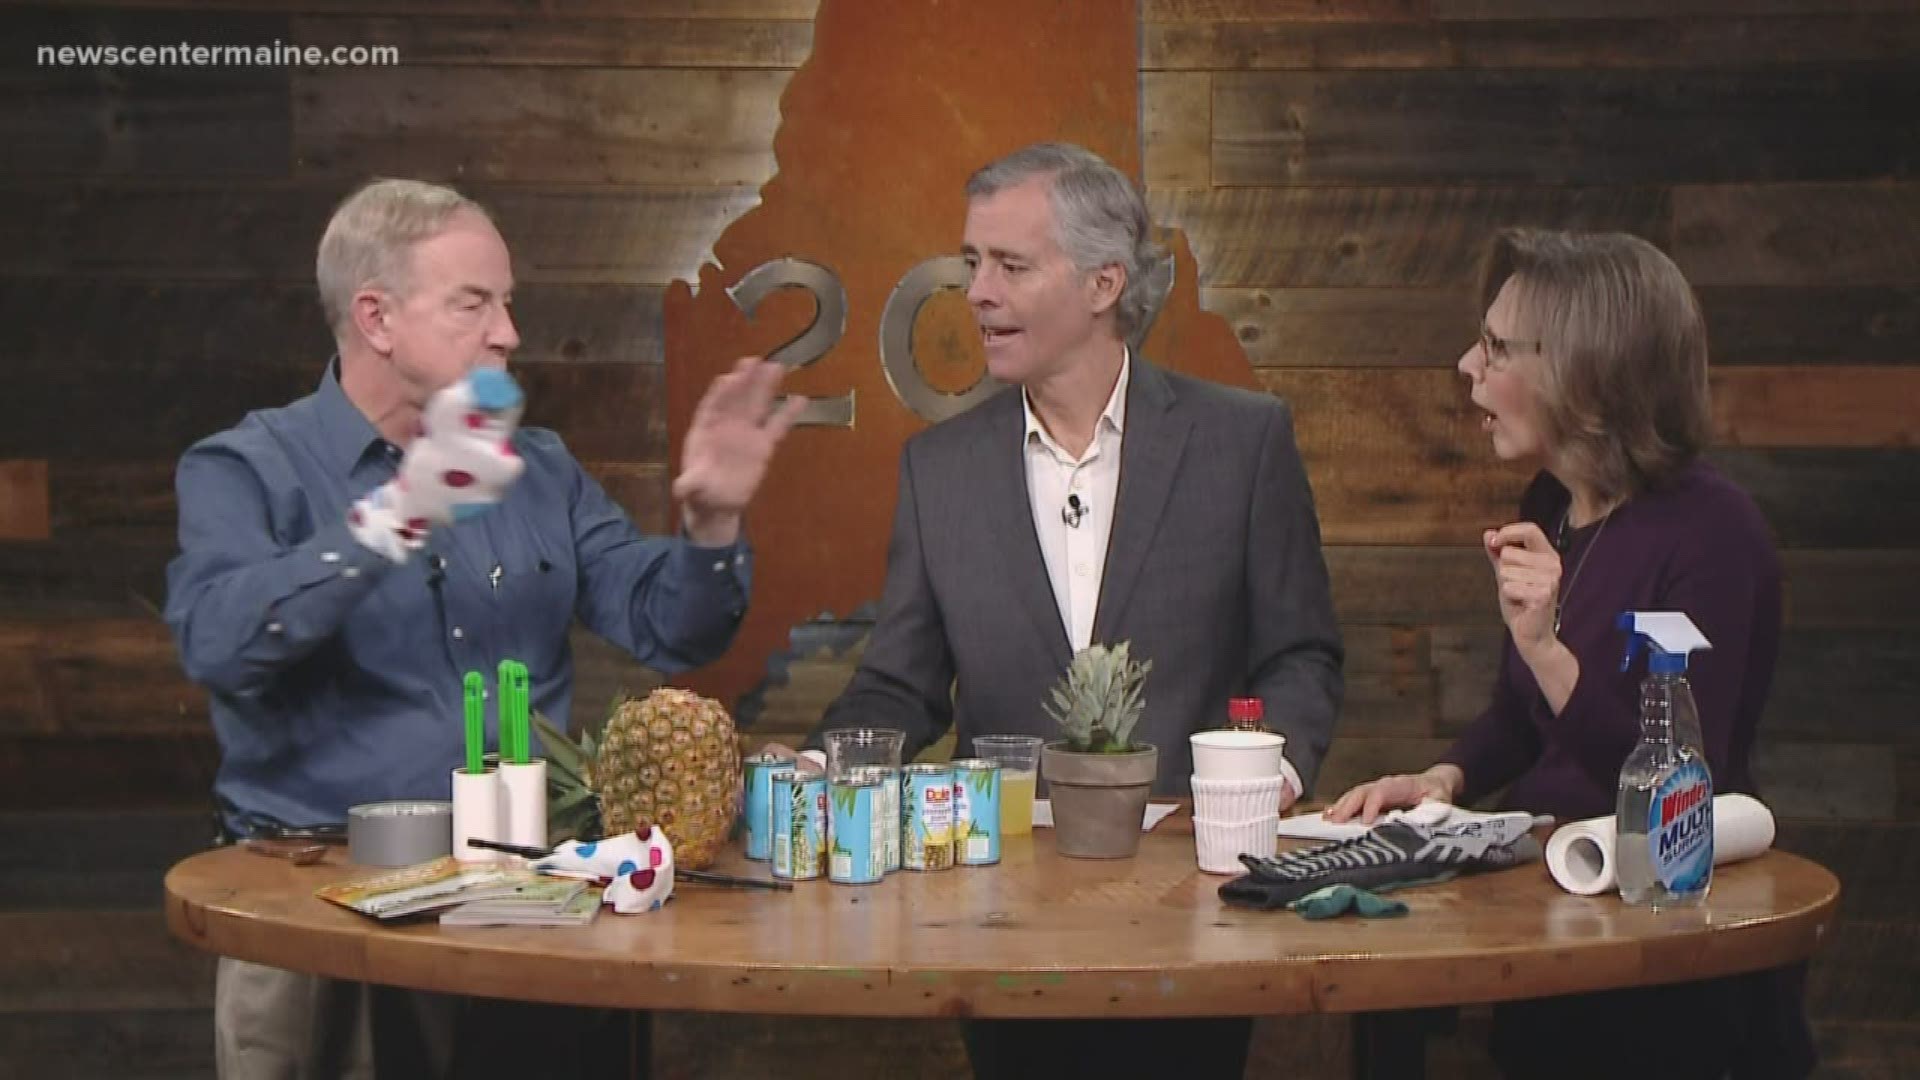 Peter Geiger from The Farmer's Almanac offers tips for using household items.